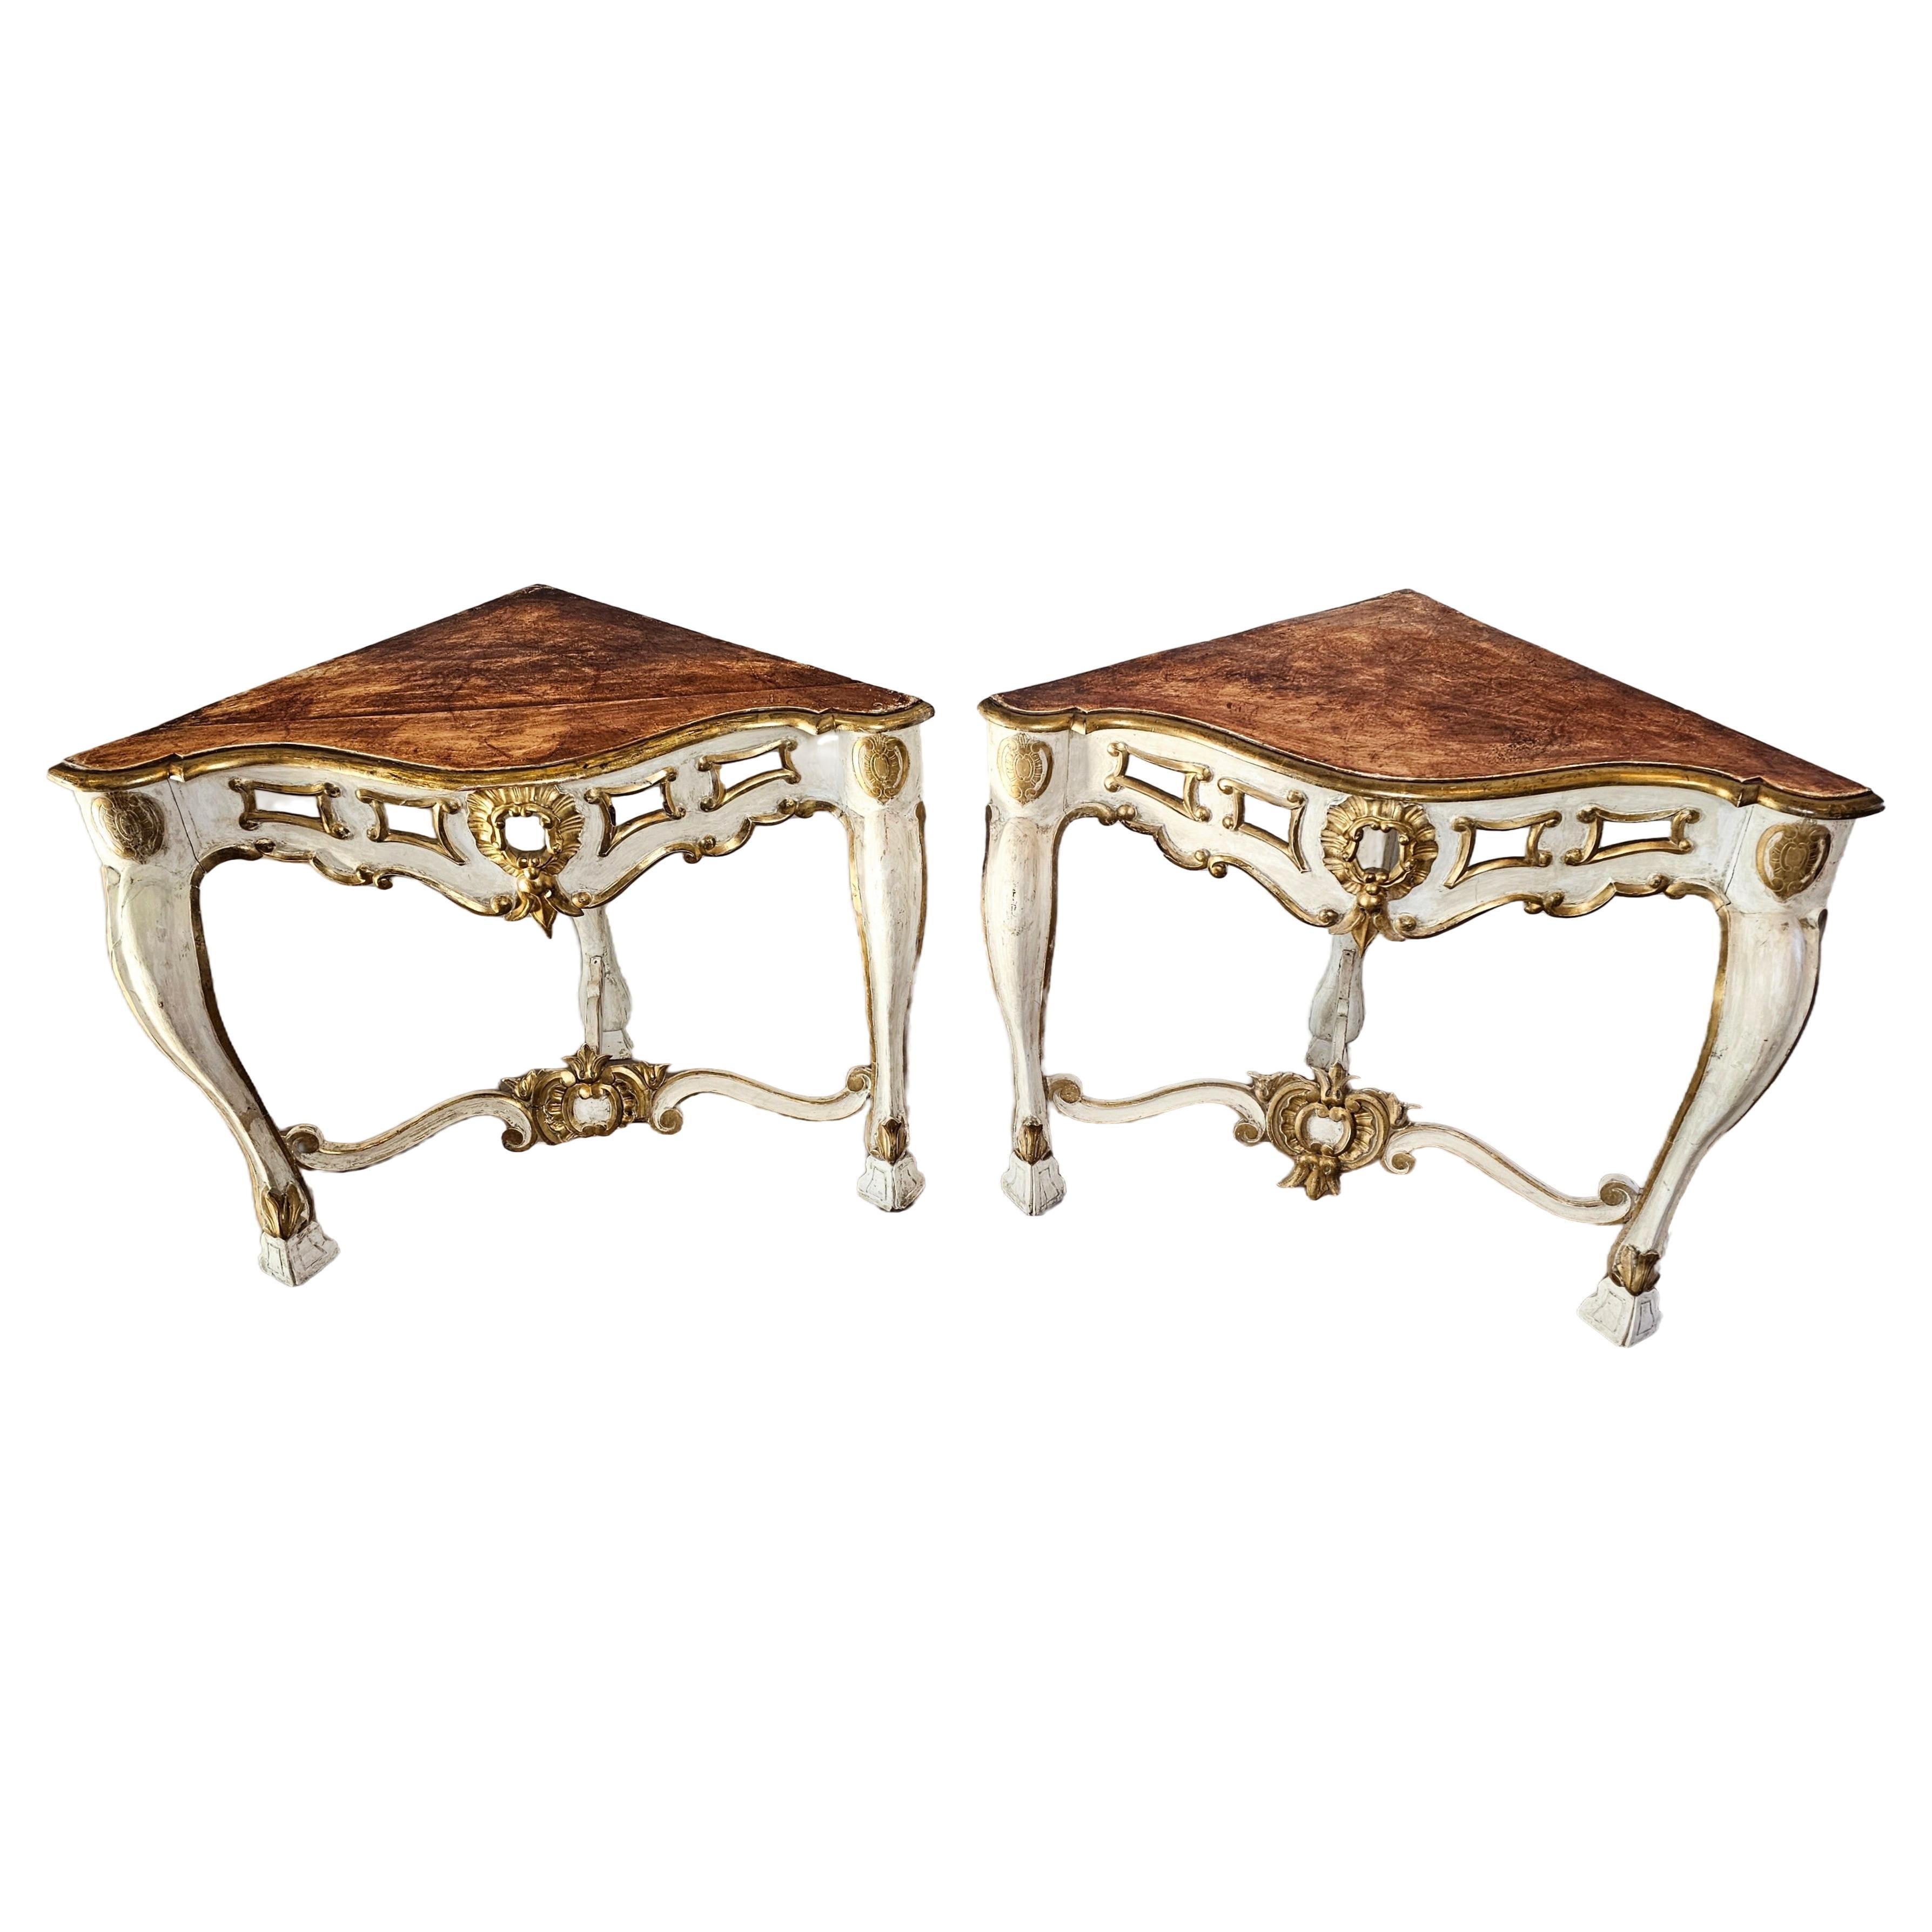 18th Century Italian Louis XV Carved Painted Gilt Wood Corner Console Table Pair